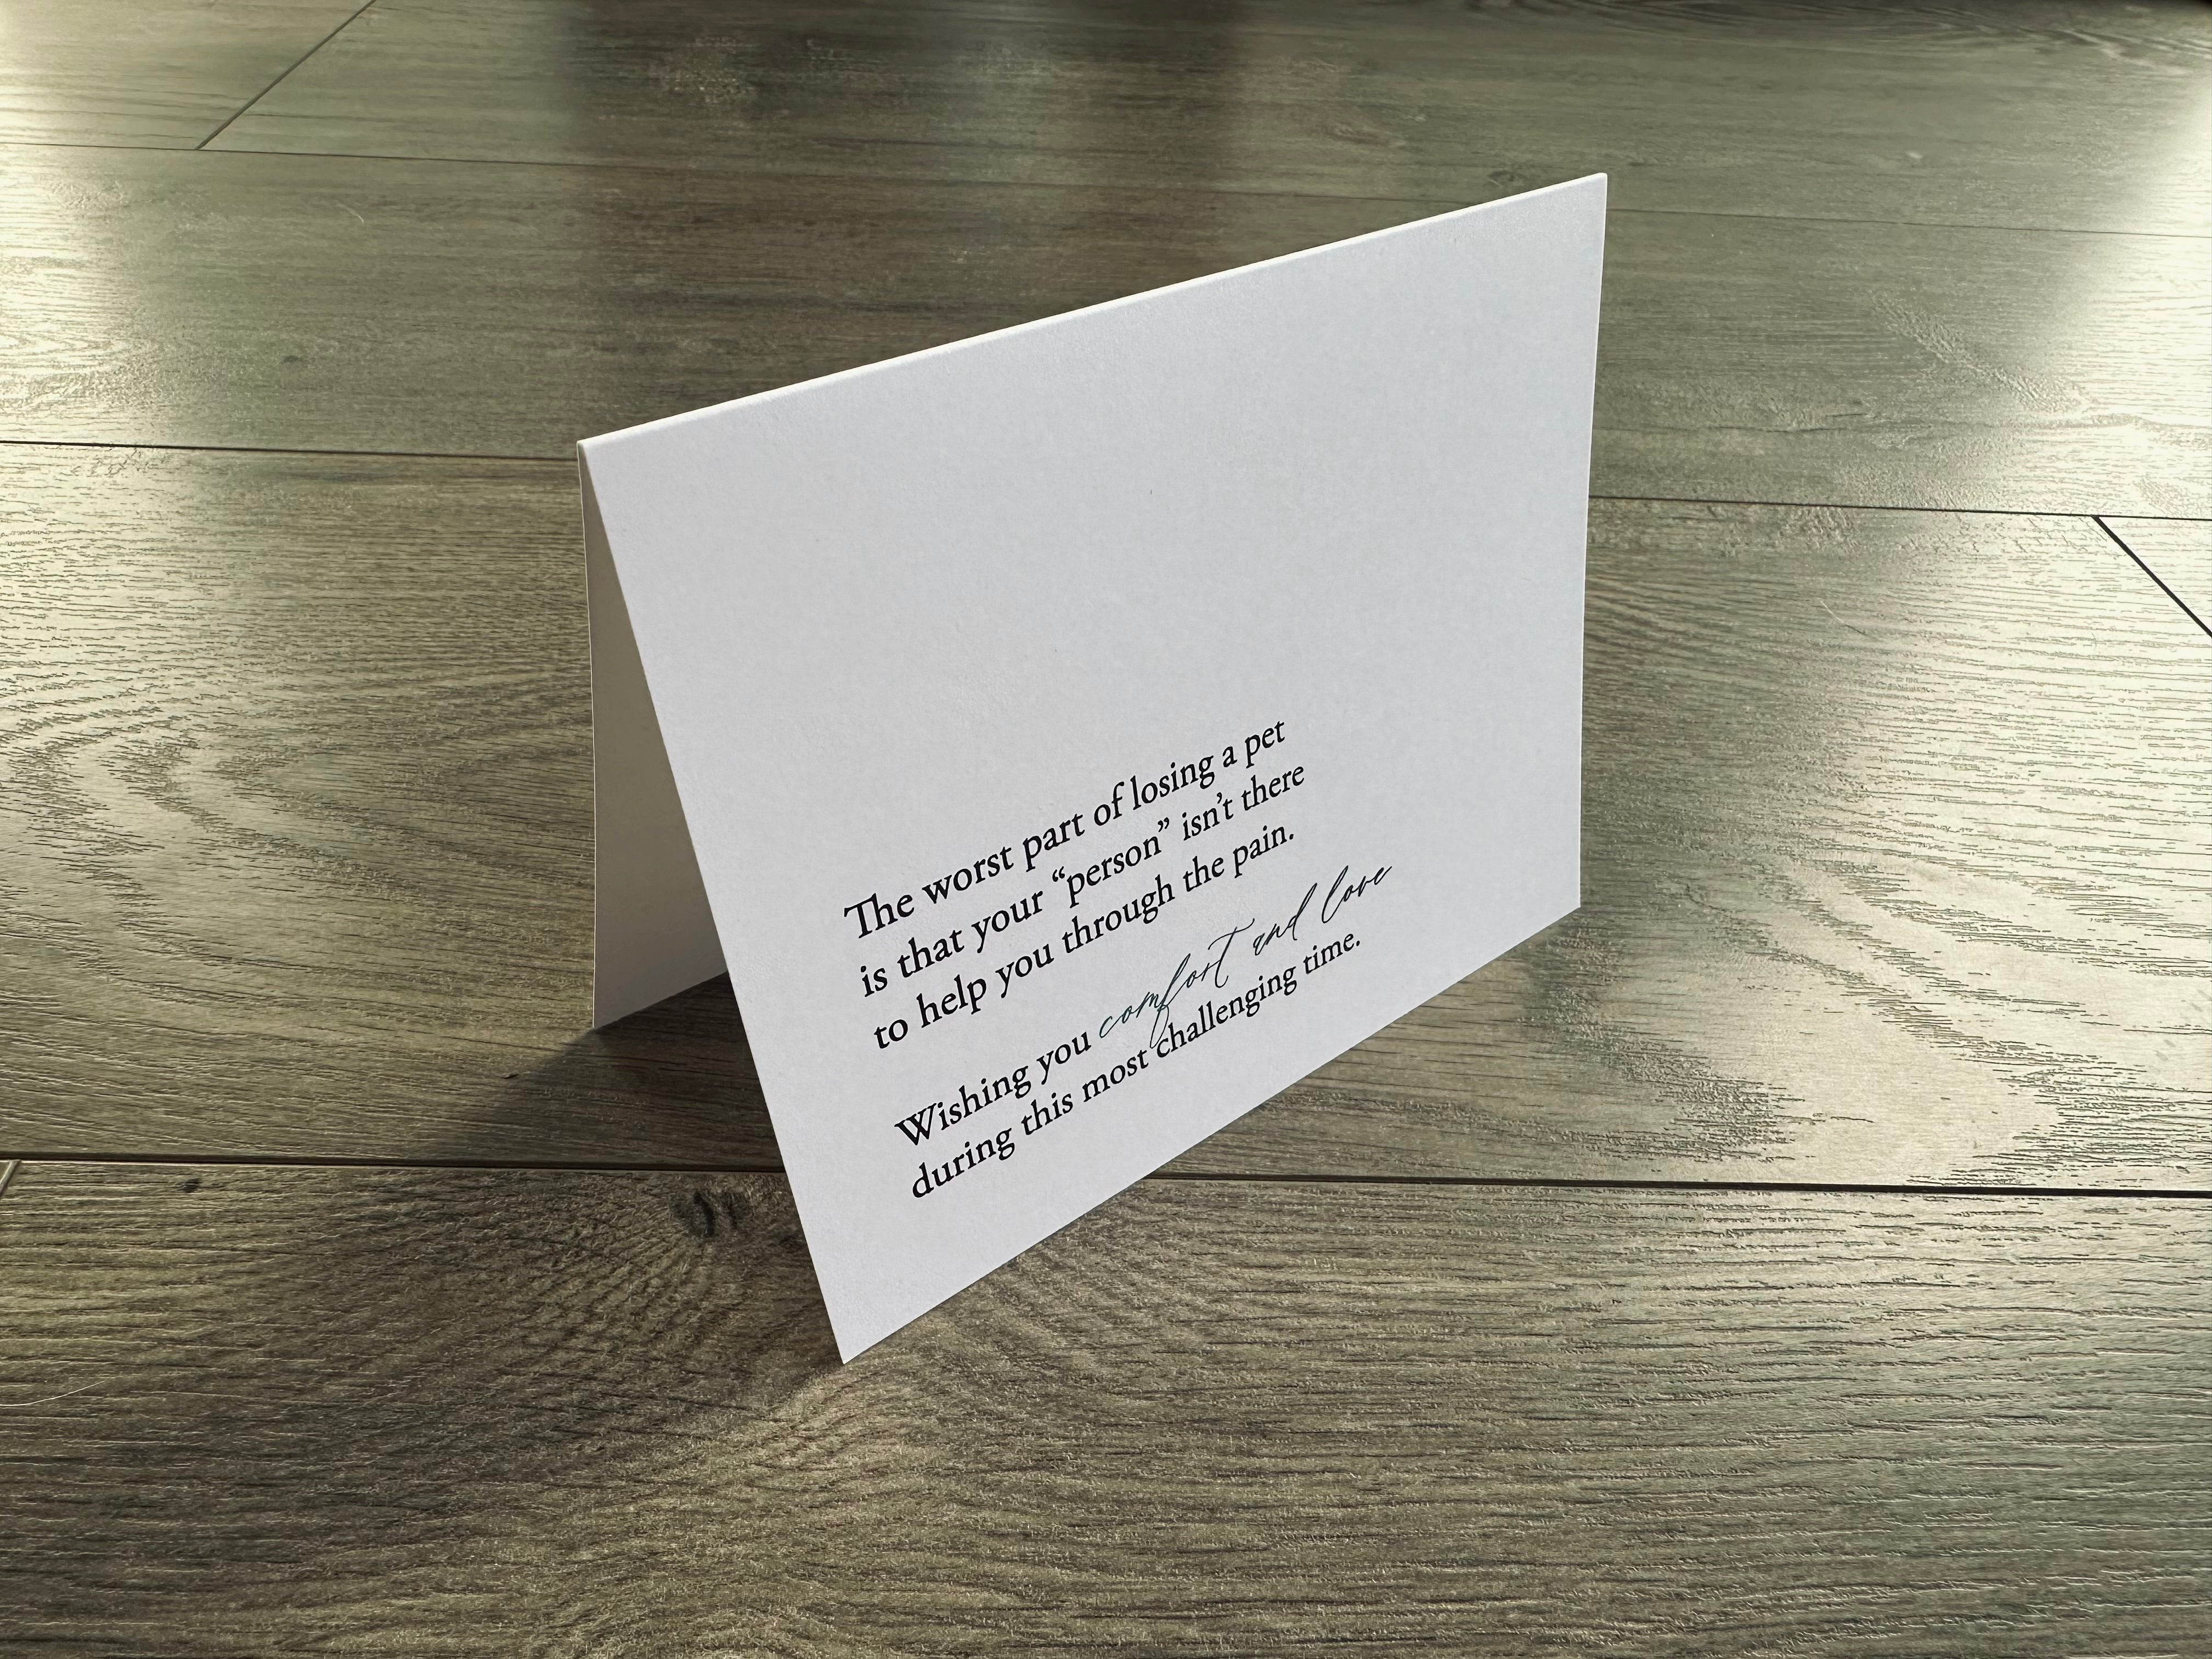 A folded white notecard is propped up on a wooden floor. It reads, "The worst part of losing a pet is that your 'person' isn't there to help you through the pain. Wishing you comfort and love during this most challenging time." Loss of Pet Collection by Stationare.